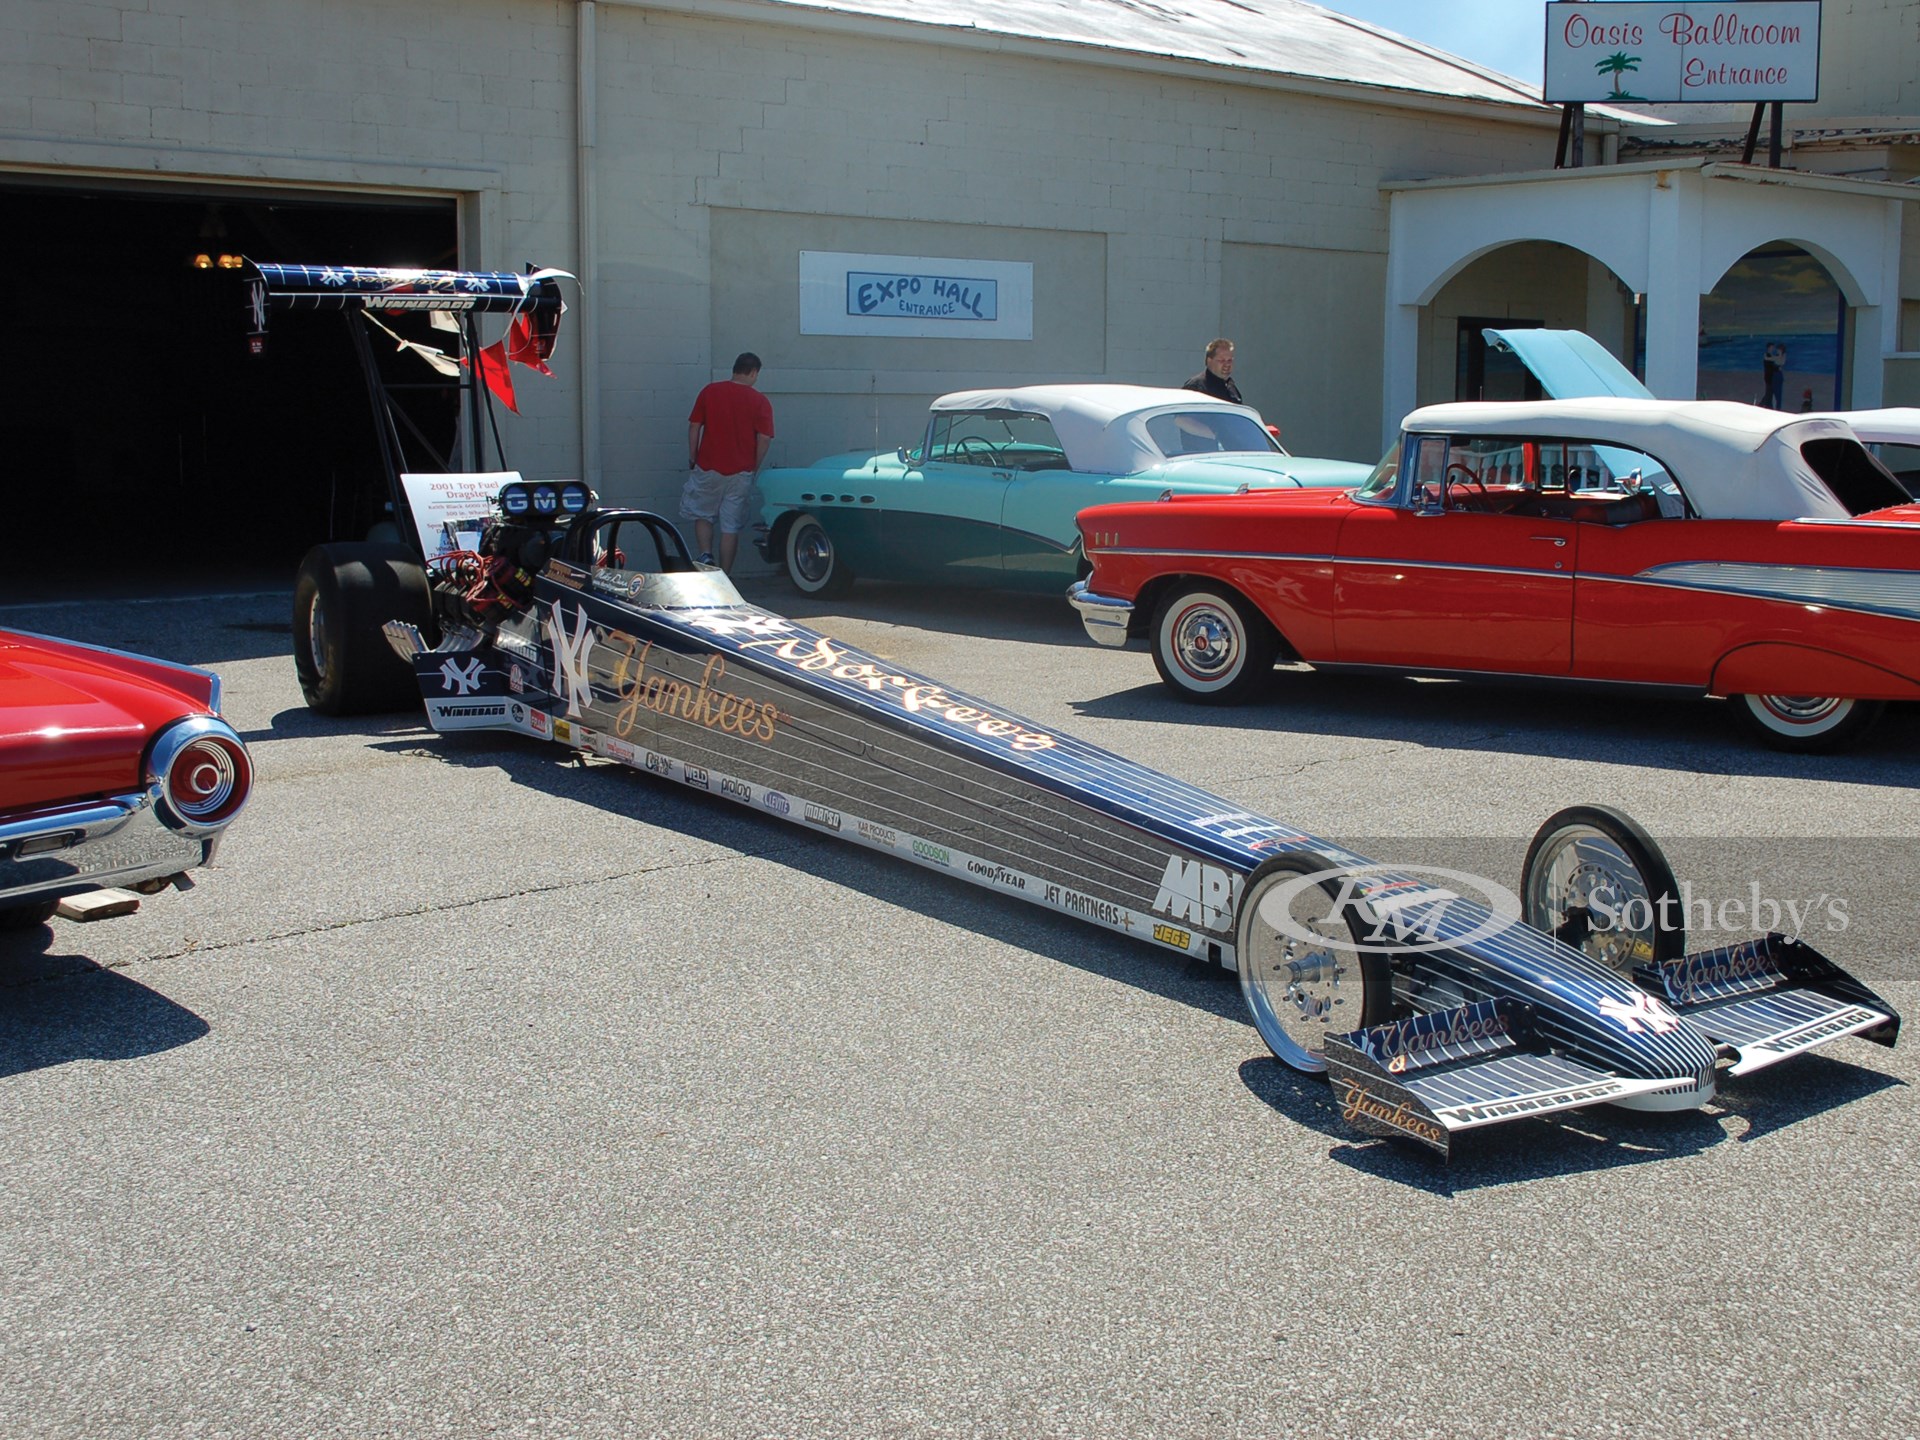 2001 MBNA Yankees Top Fuel Dragster 